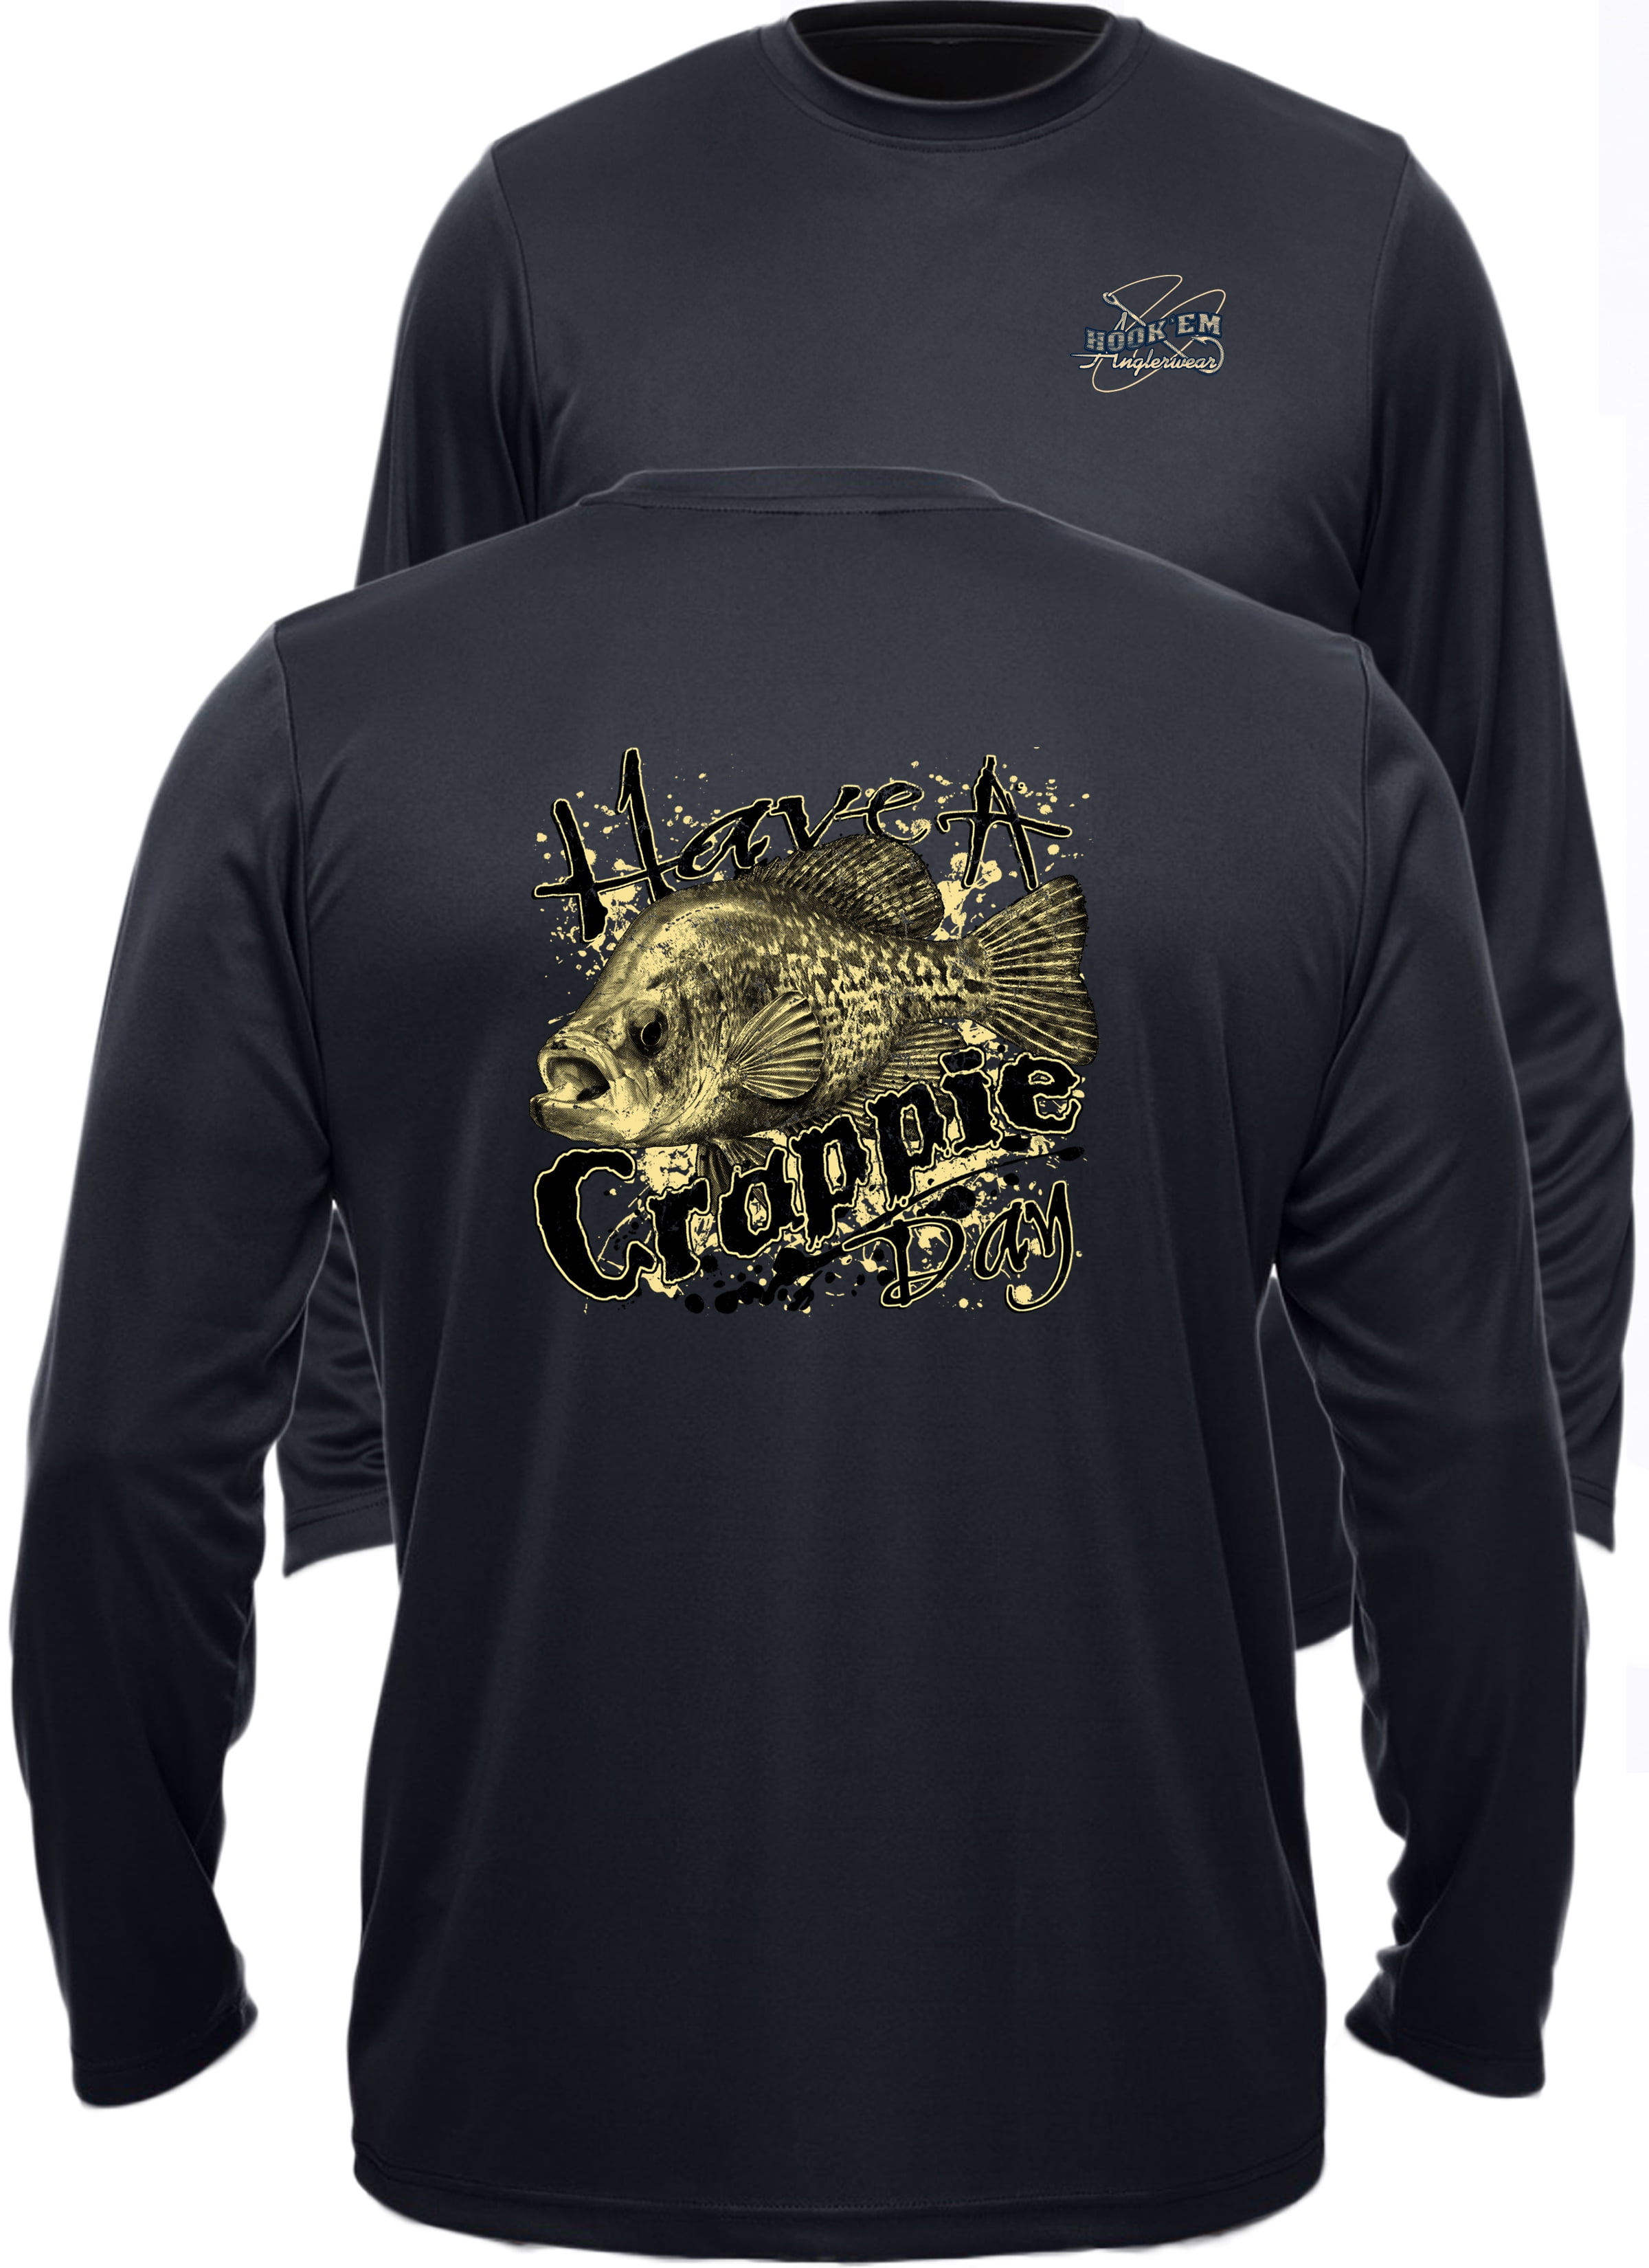  BLACK CRAPPIE MATTER CRAPPIE FISHING T SHIRT : Clothing, Shoes  & Jewelry